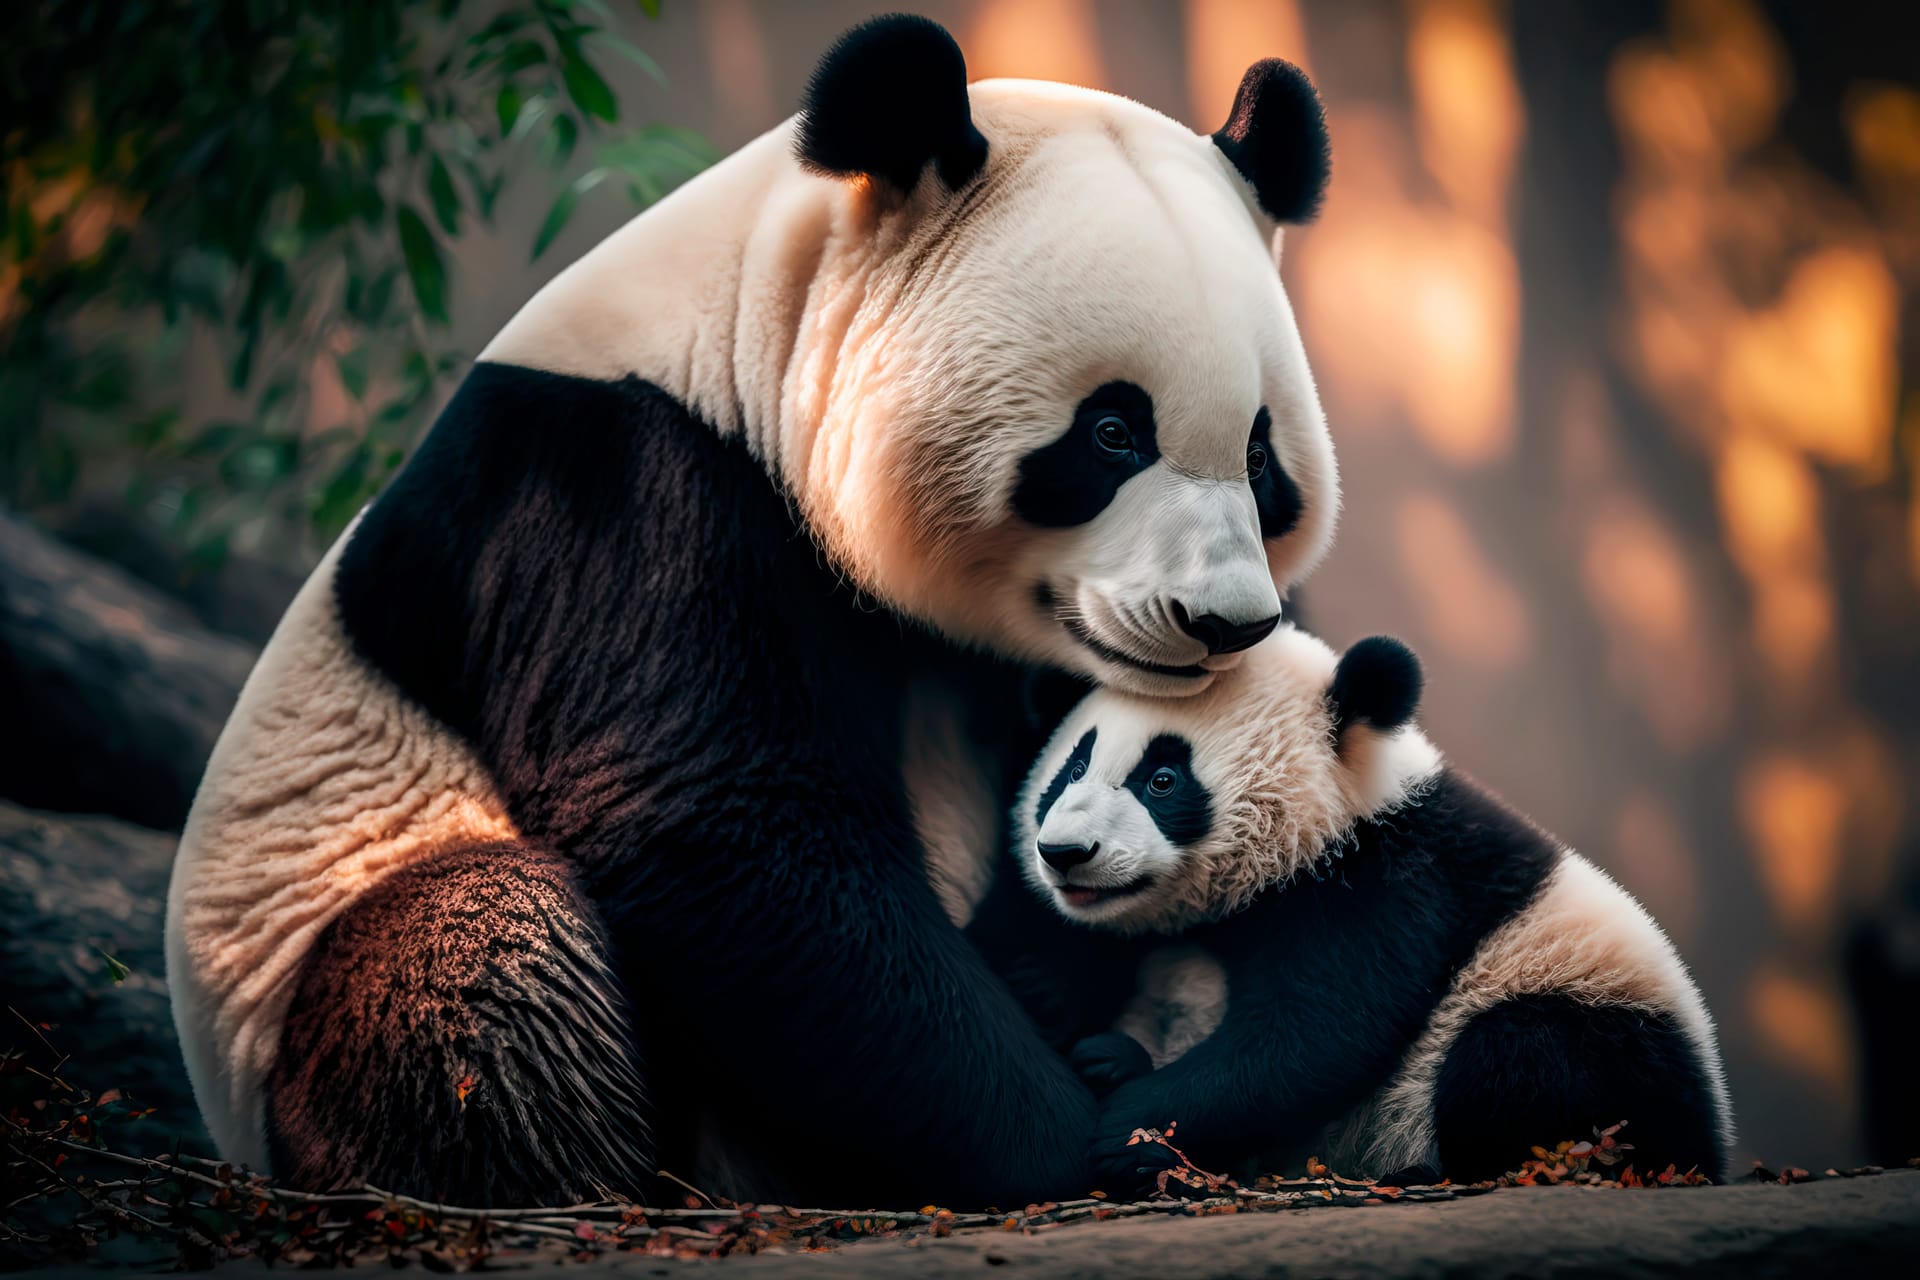 Baby panda happy together chinese park realistic digital illustration picture